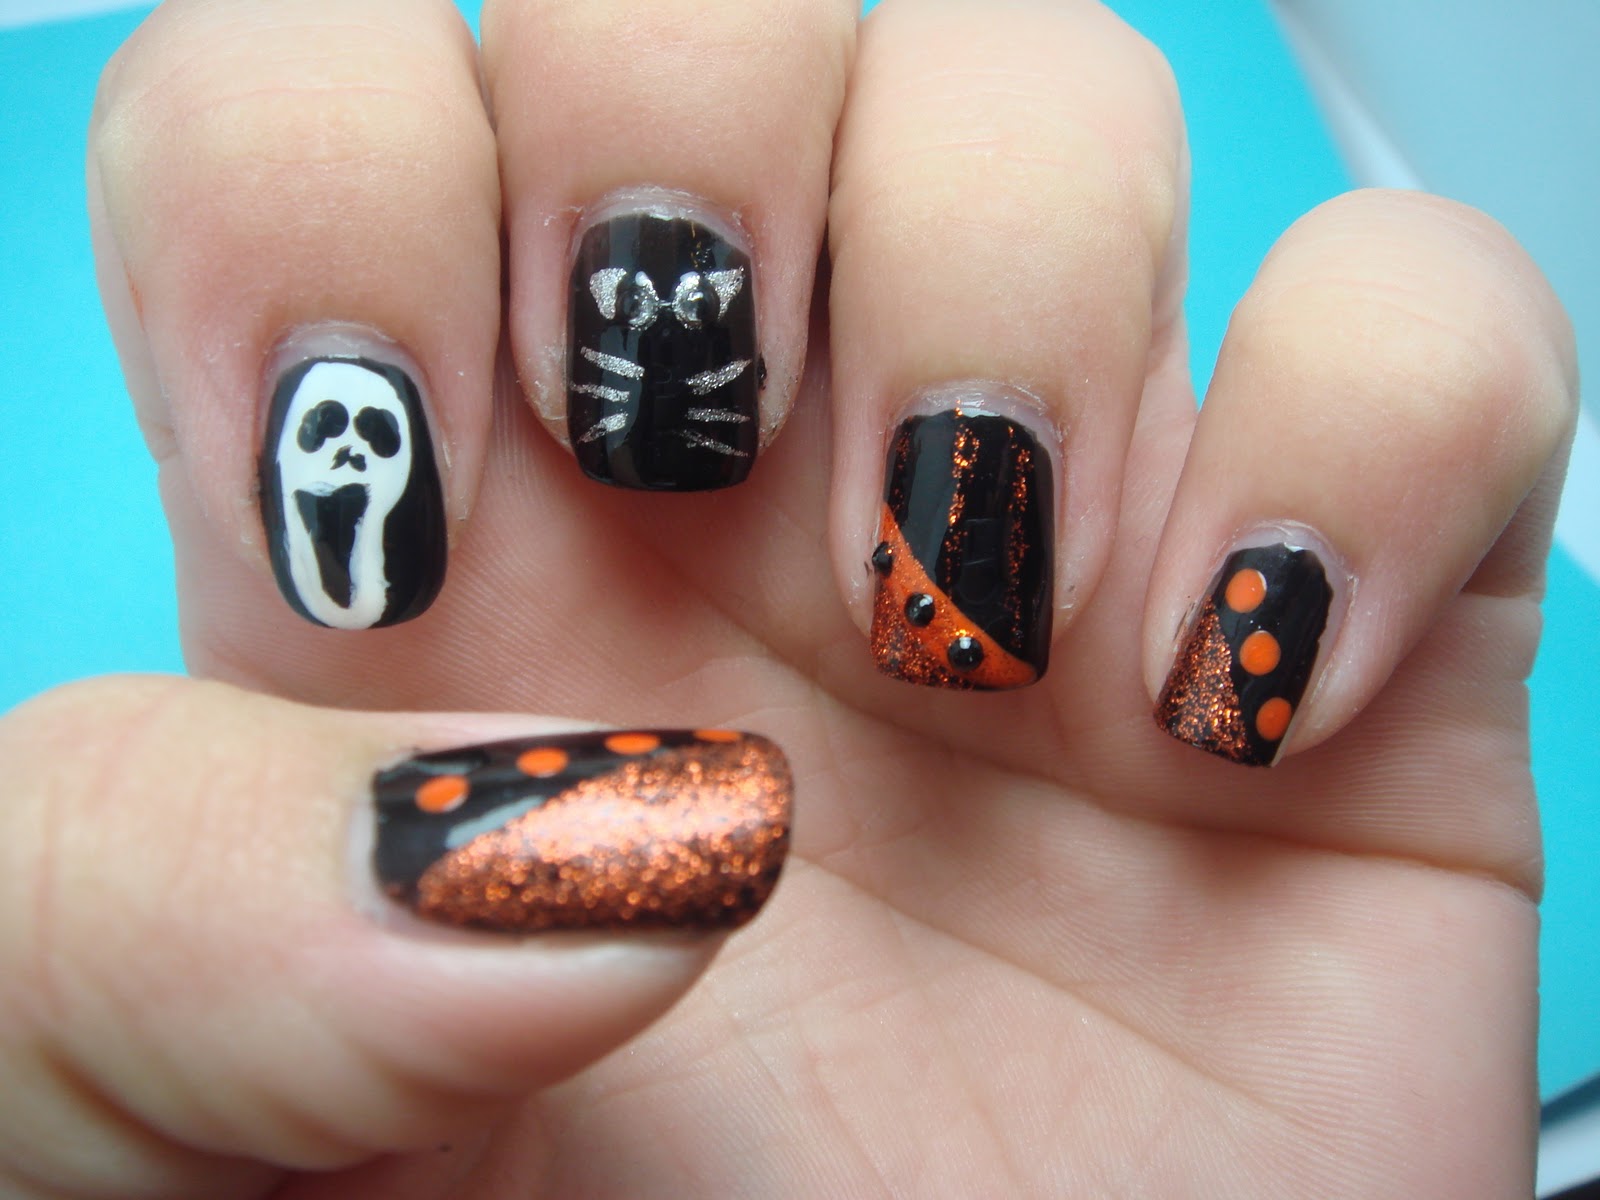 3. Quick and Easy Halloween Nail Designs - wide 5